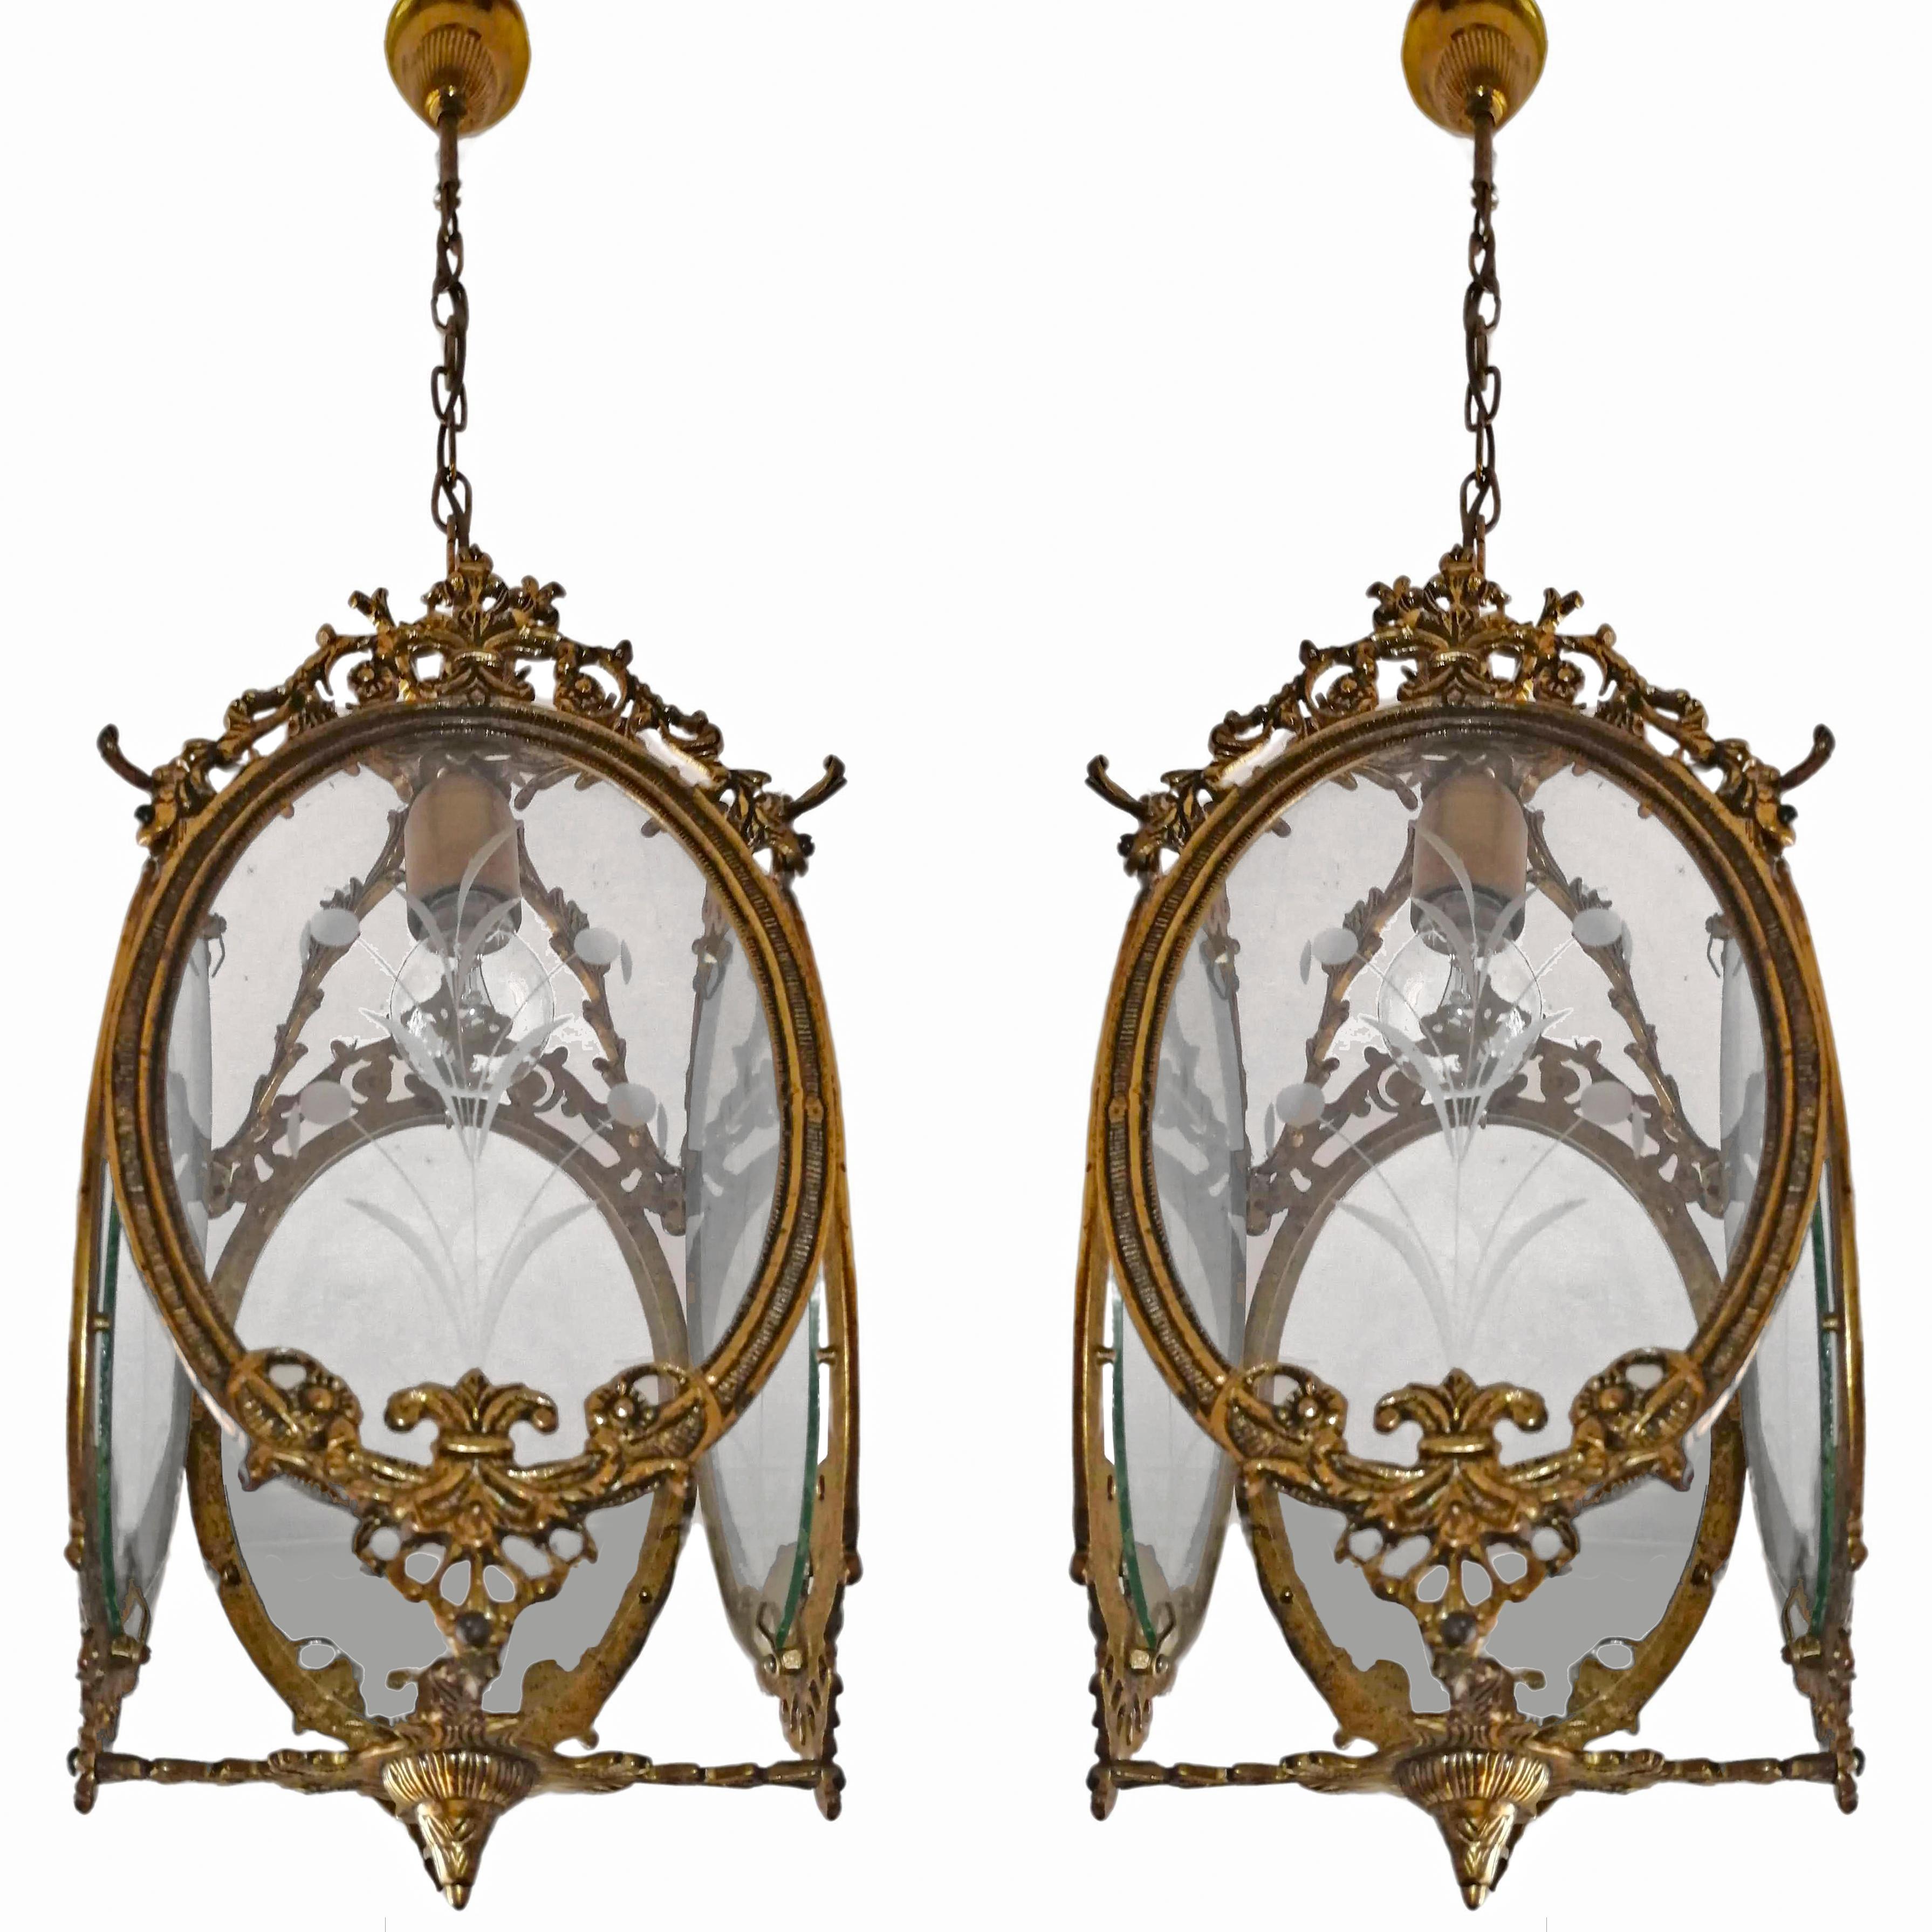 Pair of Antique Louis XVI French Lanterns Chandeliers in Gilt Bronze & Cut Glass In Good Condition For Sale In Coimbra, PT